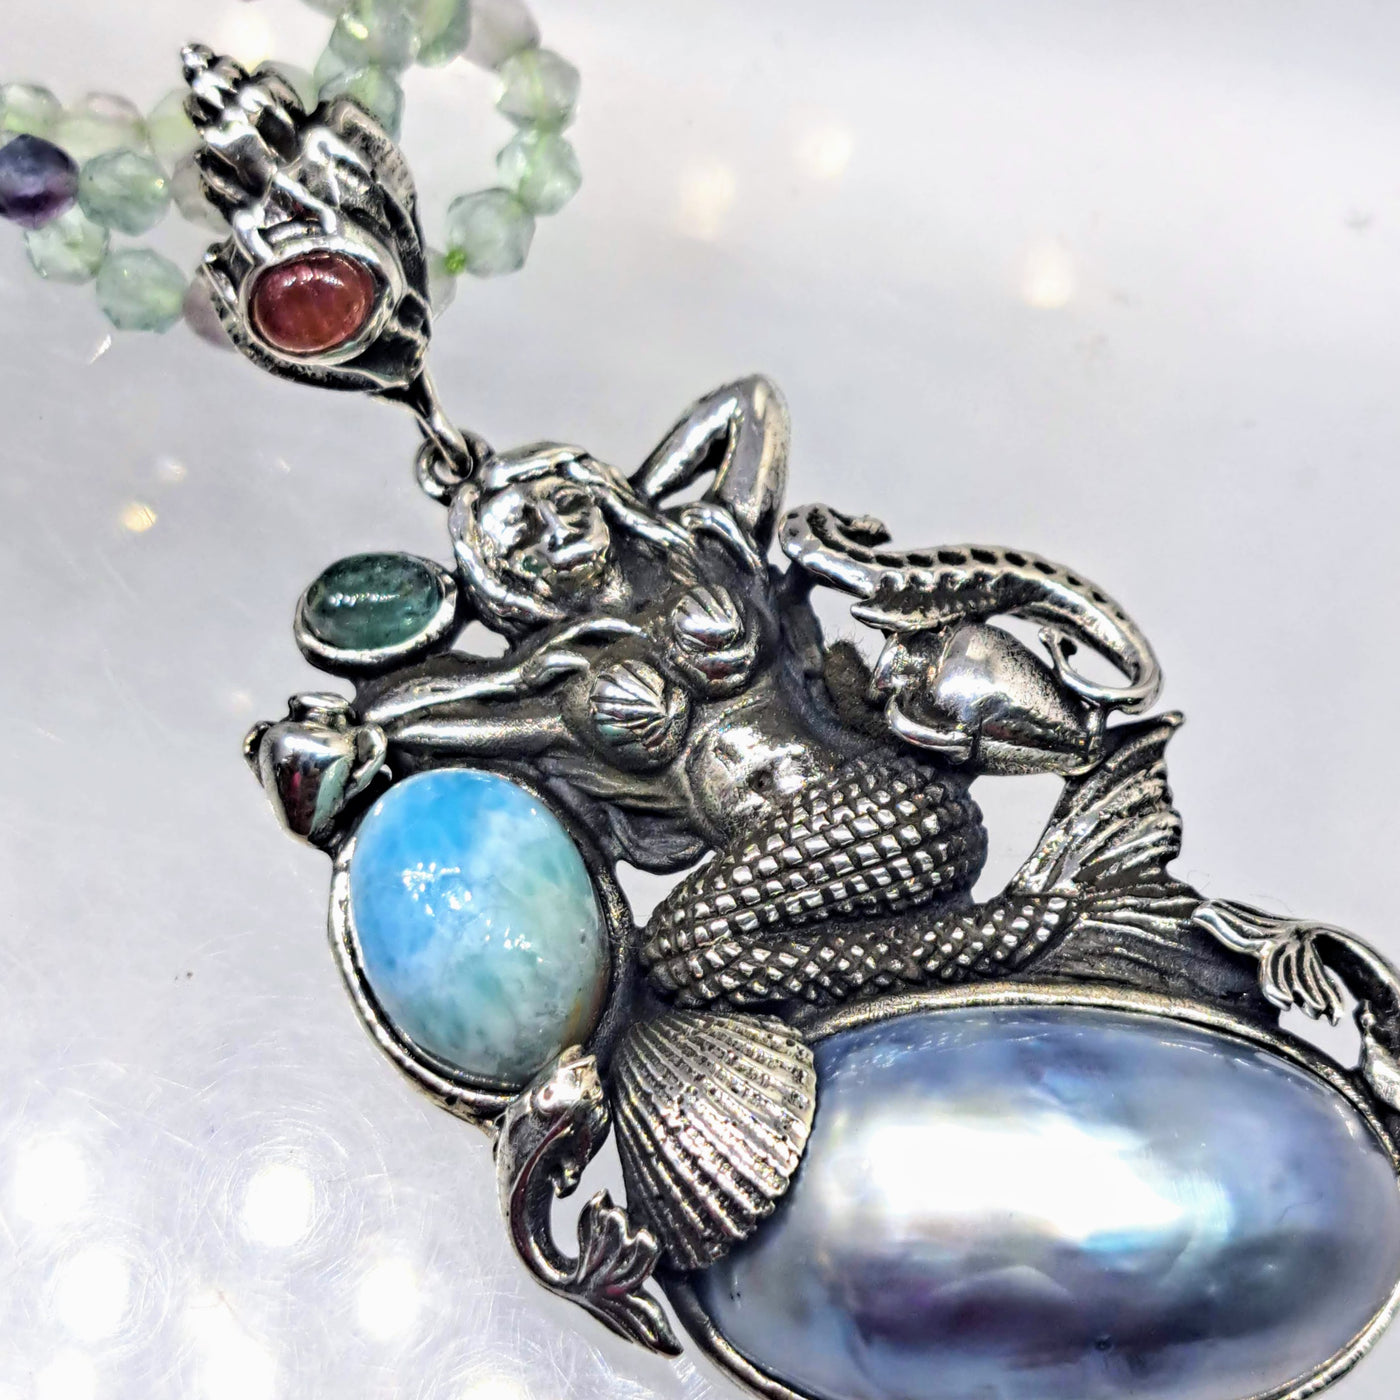 "Mermaid Life" 3" Pendant 20" Necklace - Larimar,Tourmaline, Mother Of Pearl, Flourite, Sterling